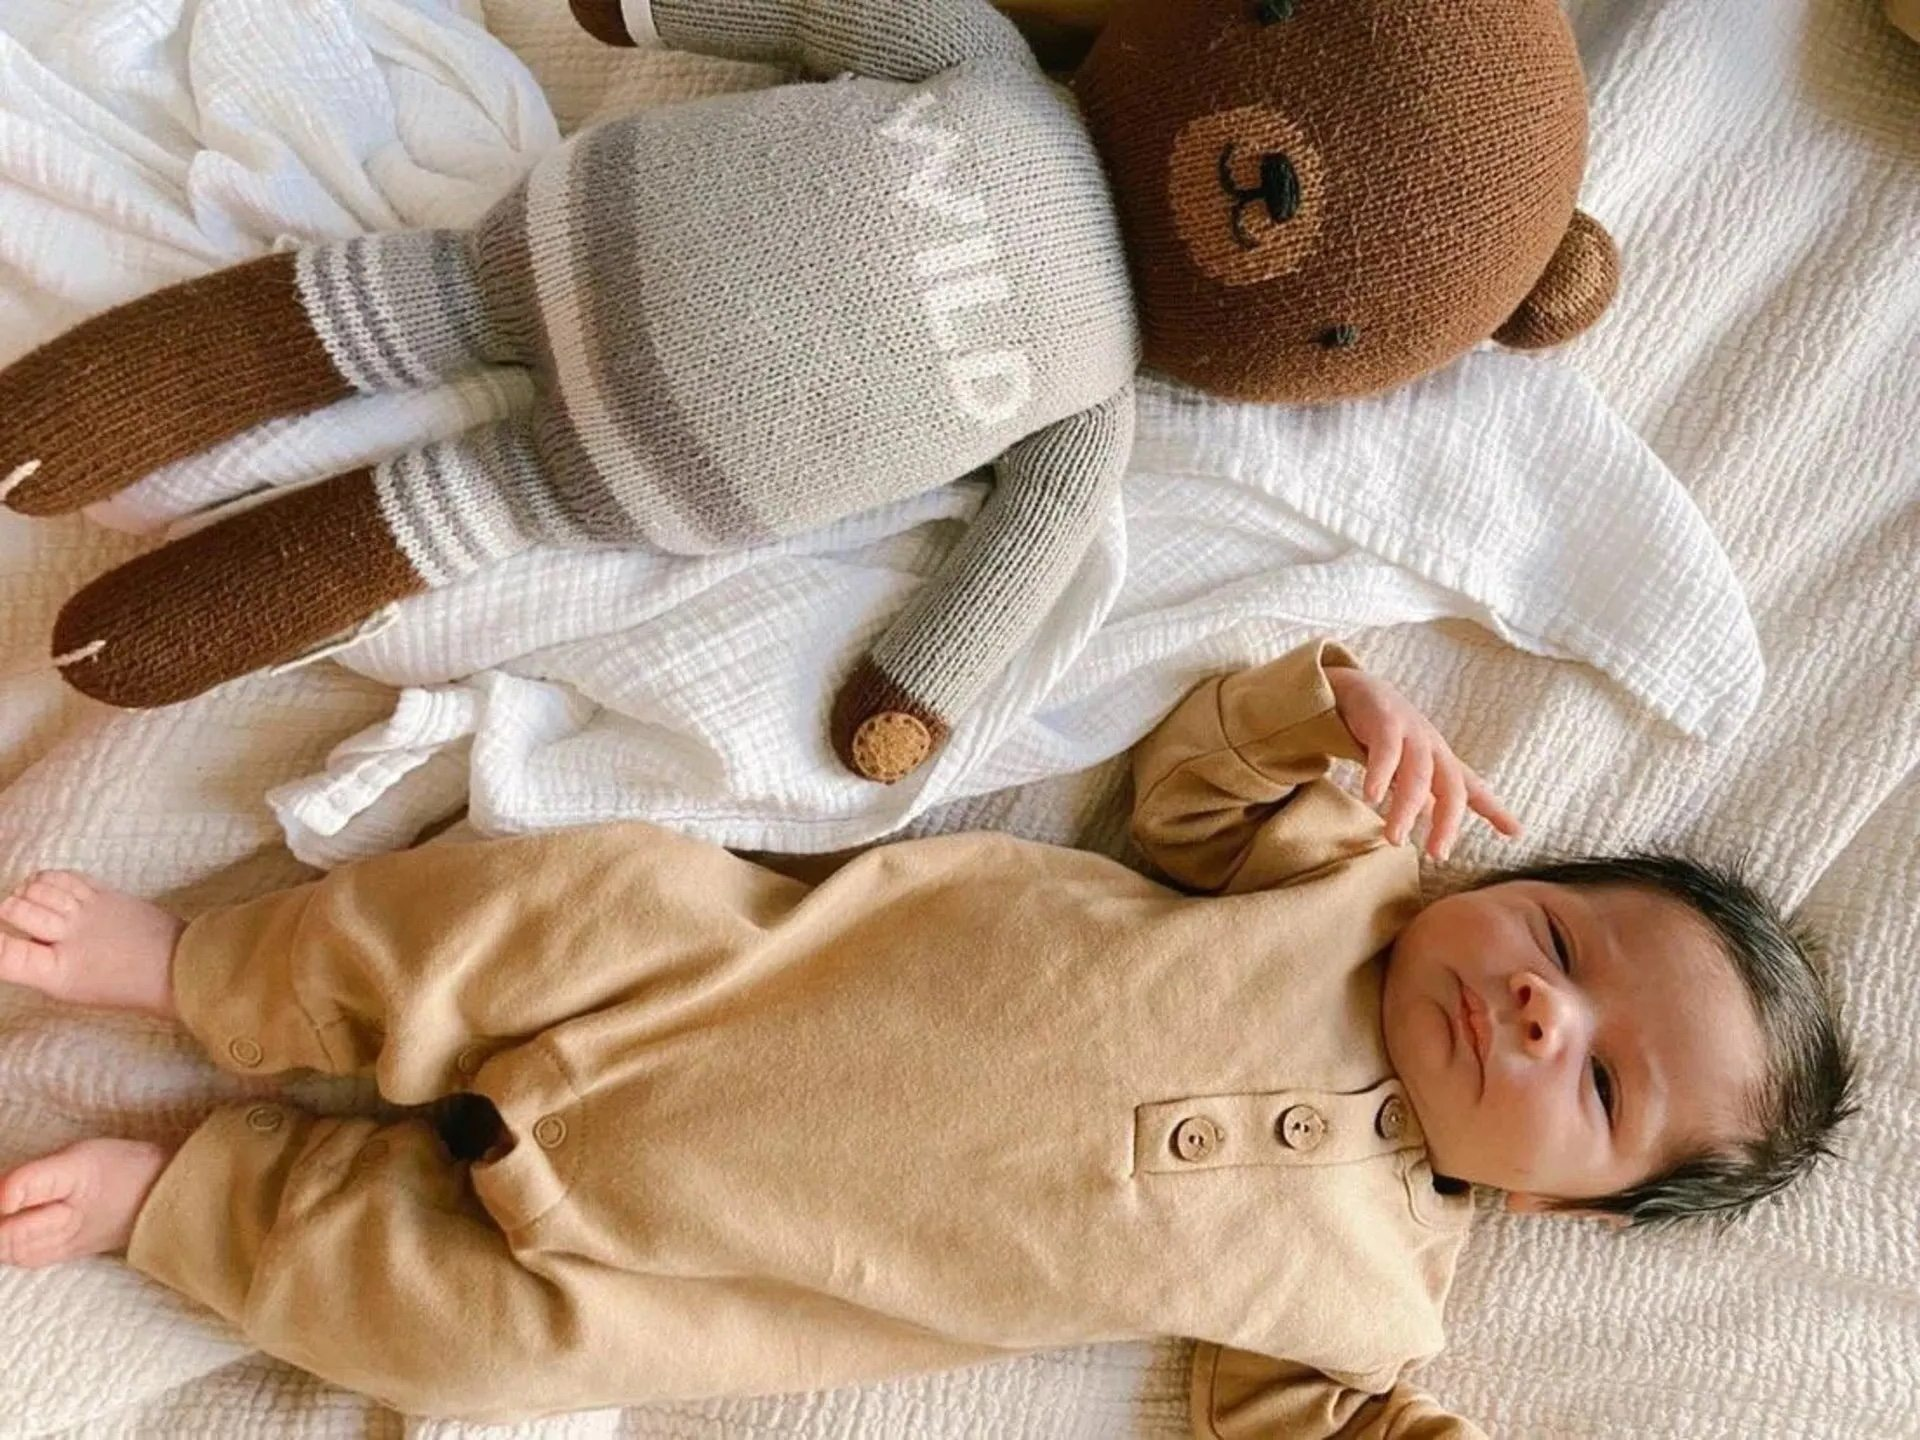 Unisex Garments Perfect for Gender-Neutral Baby Showers